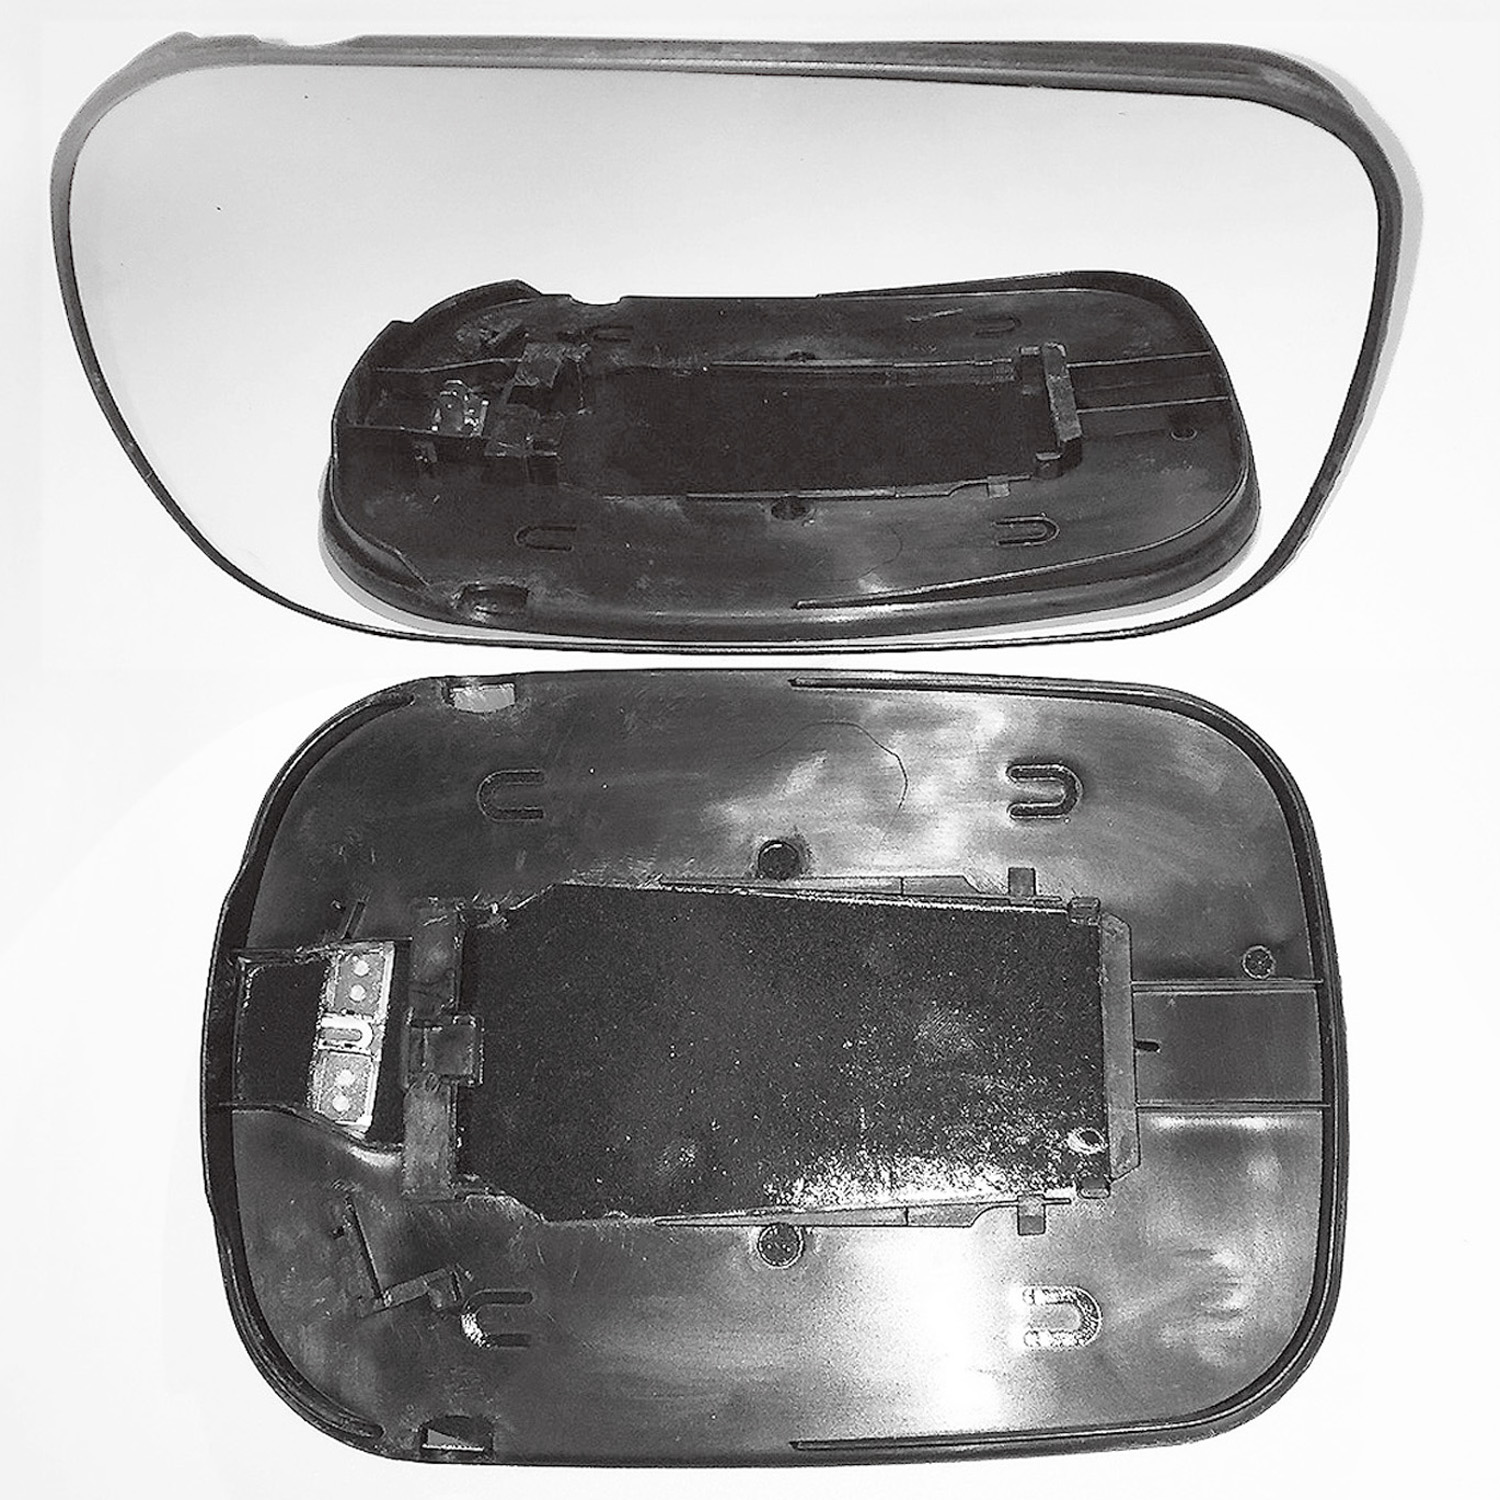 Volvo XC70 Wing Mirror Glass With Base LEFT HAND ( UK Passenger Side ) 2001 to 2006 – Heated Base Convex Mirror